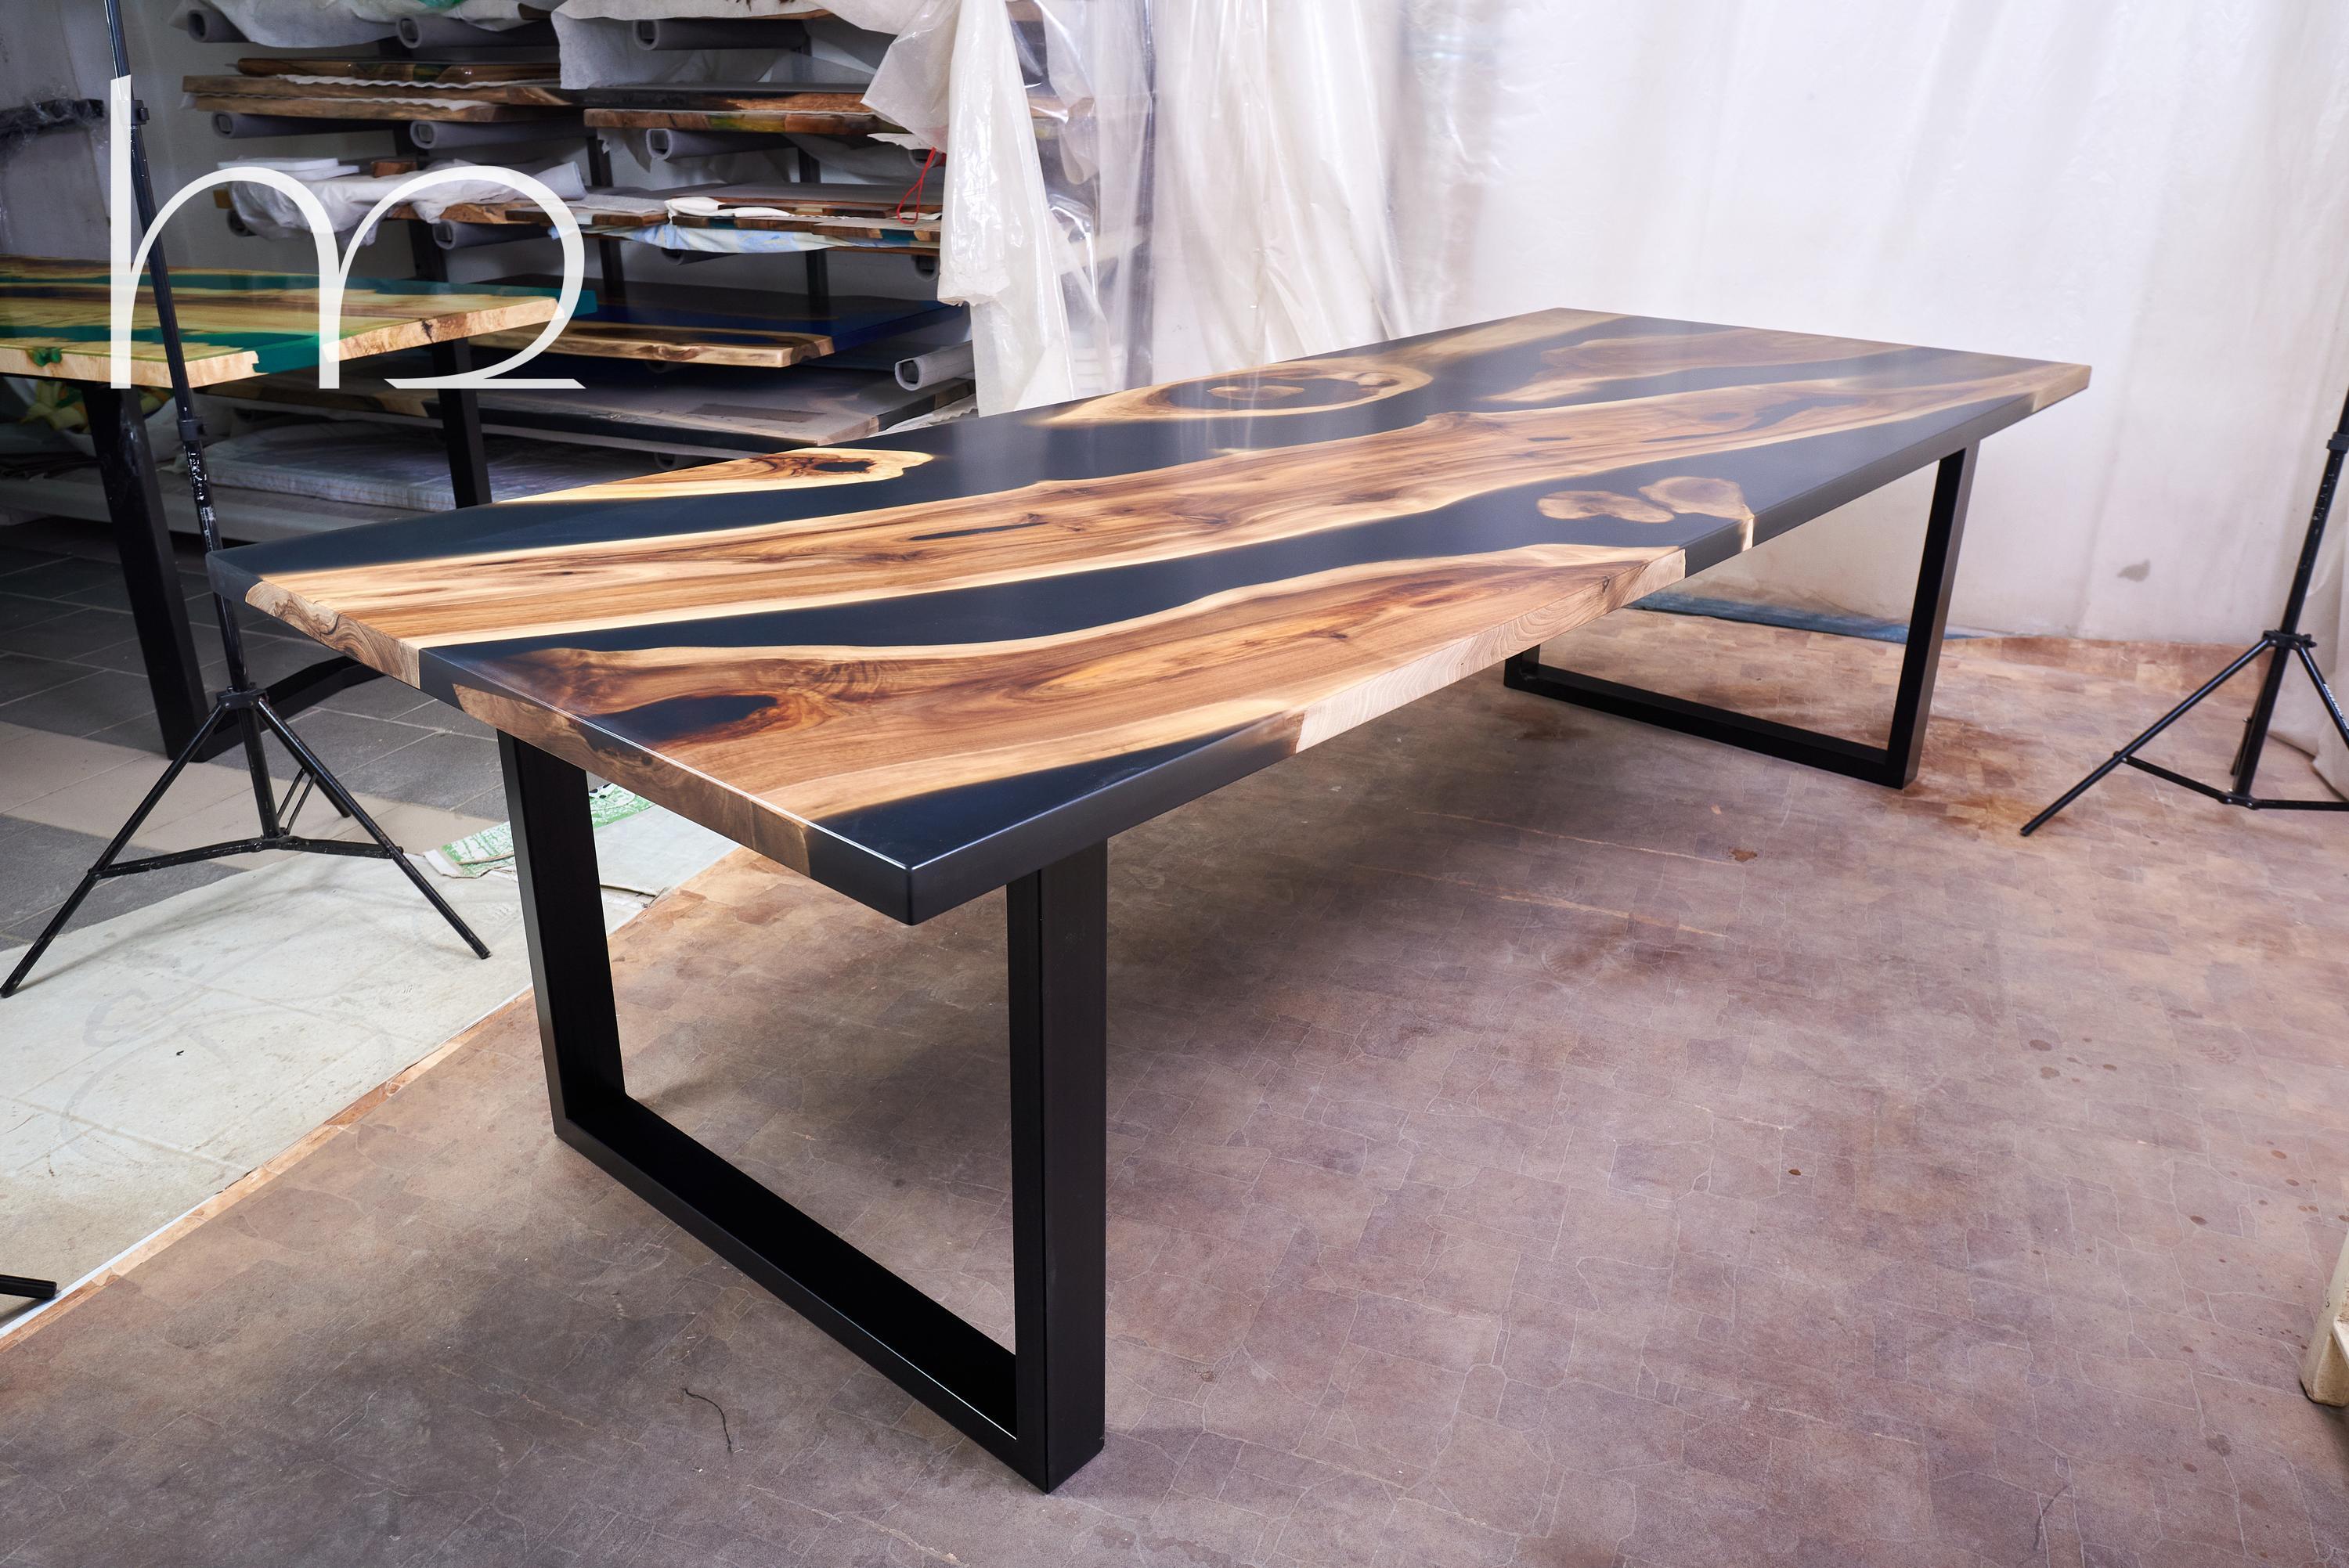 The table is made of fine material. These are old slabs and walnut roots. With its unique texture, vein color and character. Immortalized for generations. Ideal for meetings and family dinners. He has a story for you.

I like to imagine how the